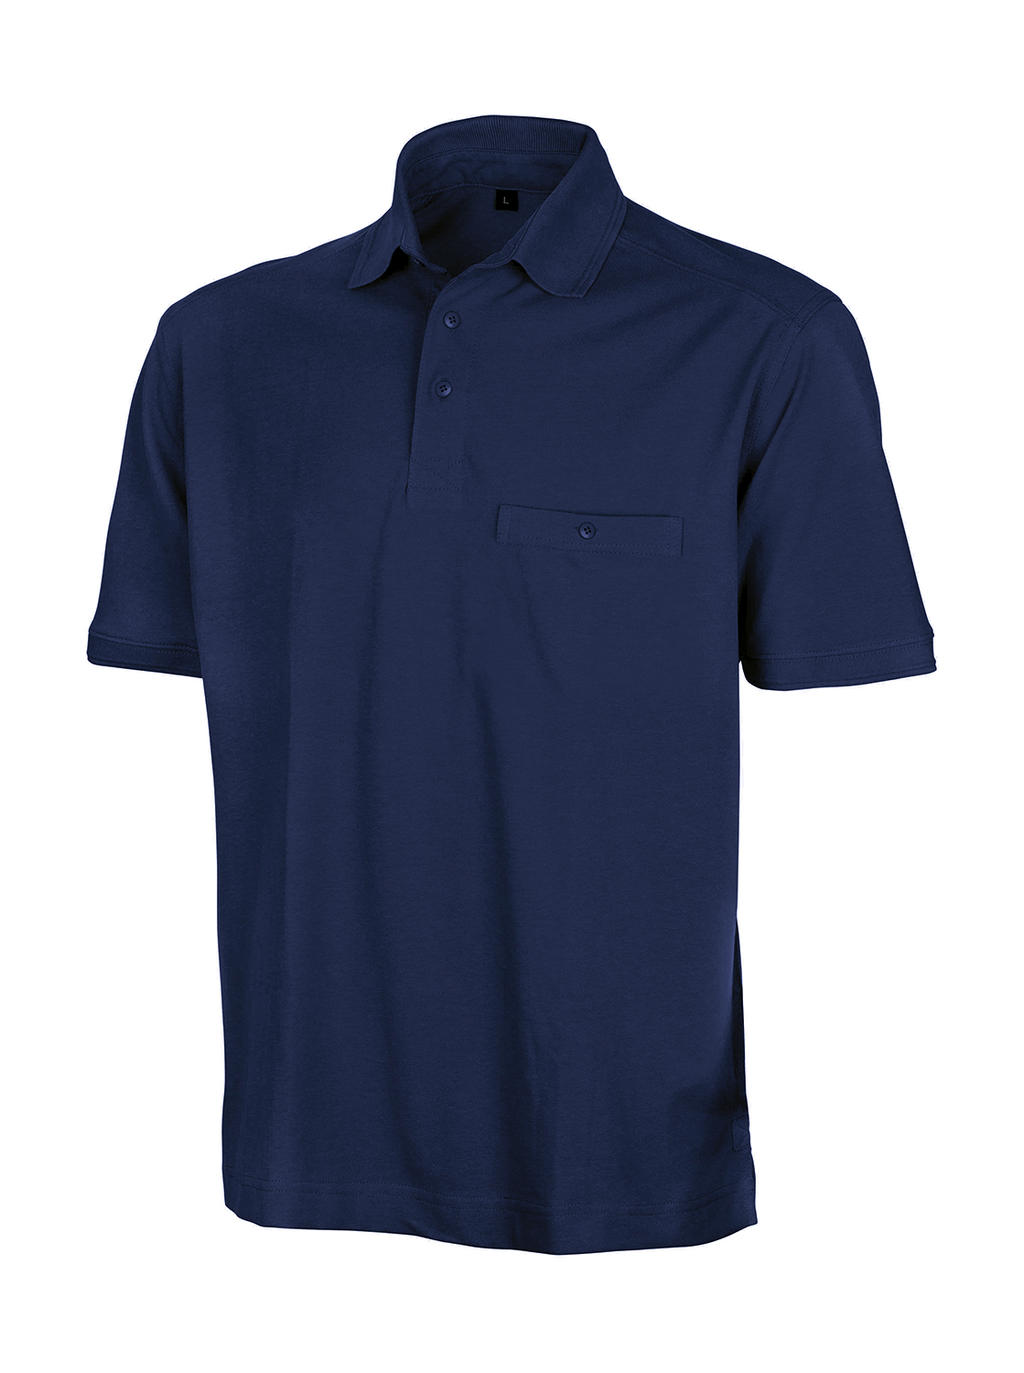  Apex Polo Shirt in Farbe Navy